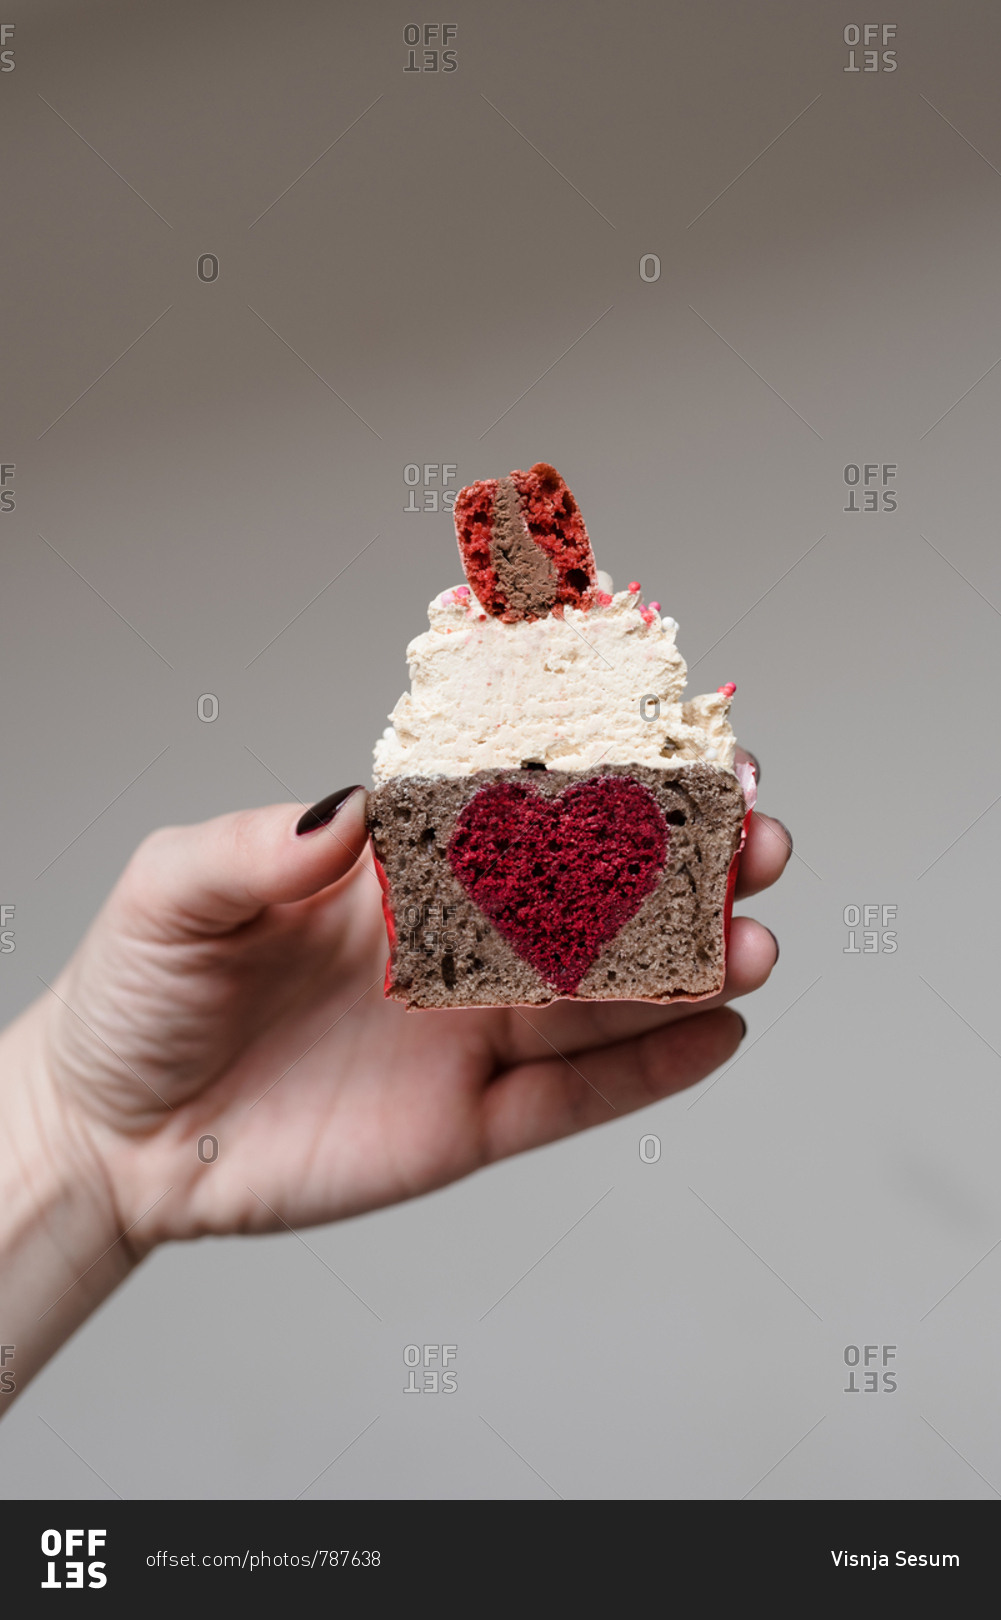 Woman holding a Valentine's day themed cupcake cut in half with heart shaped filling in the middle